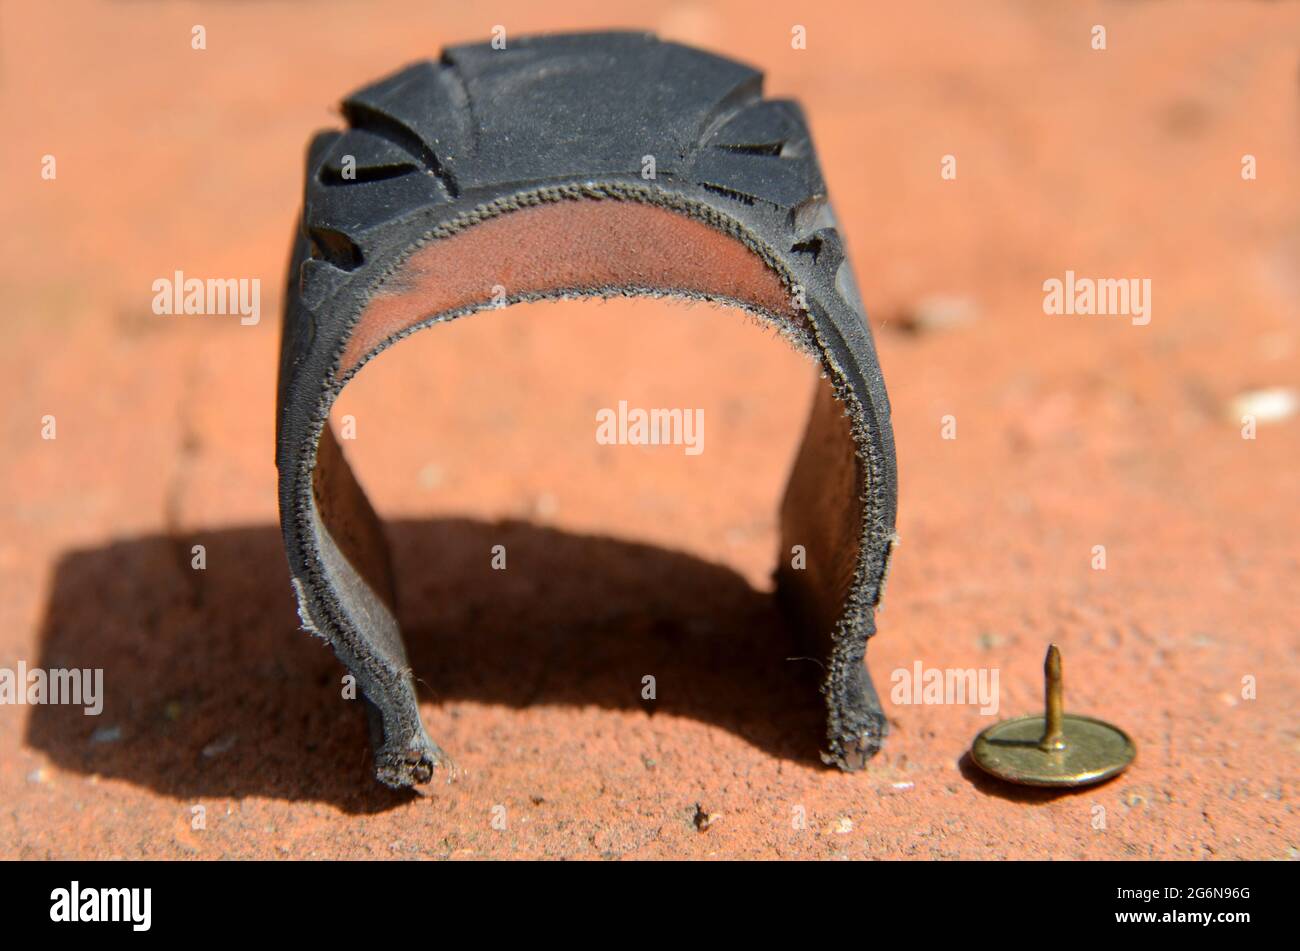 Cross section of bicycle tyre with Kevlar reinforcement, and a thumb tack as reference. Stock Photo